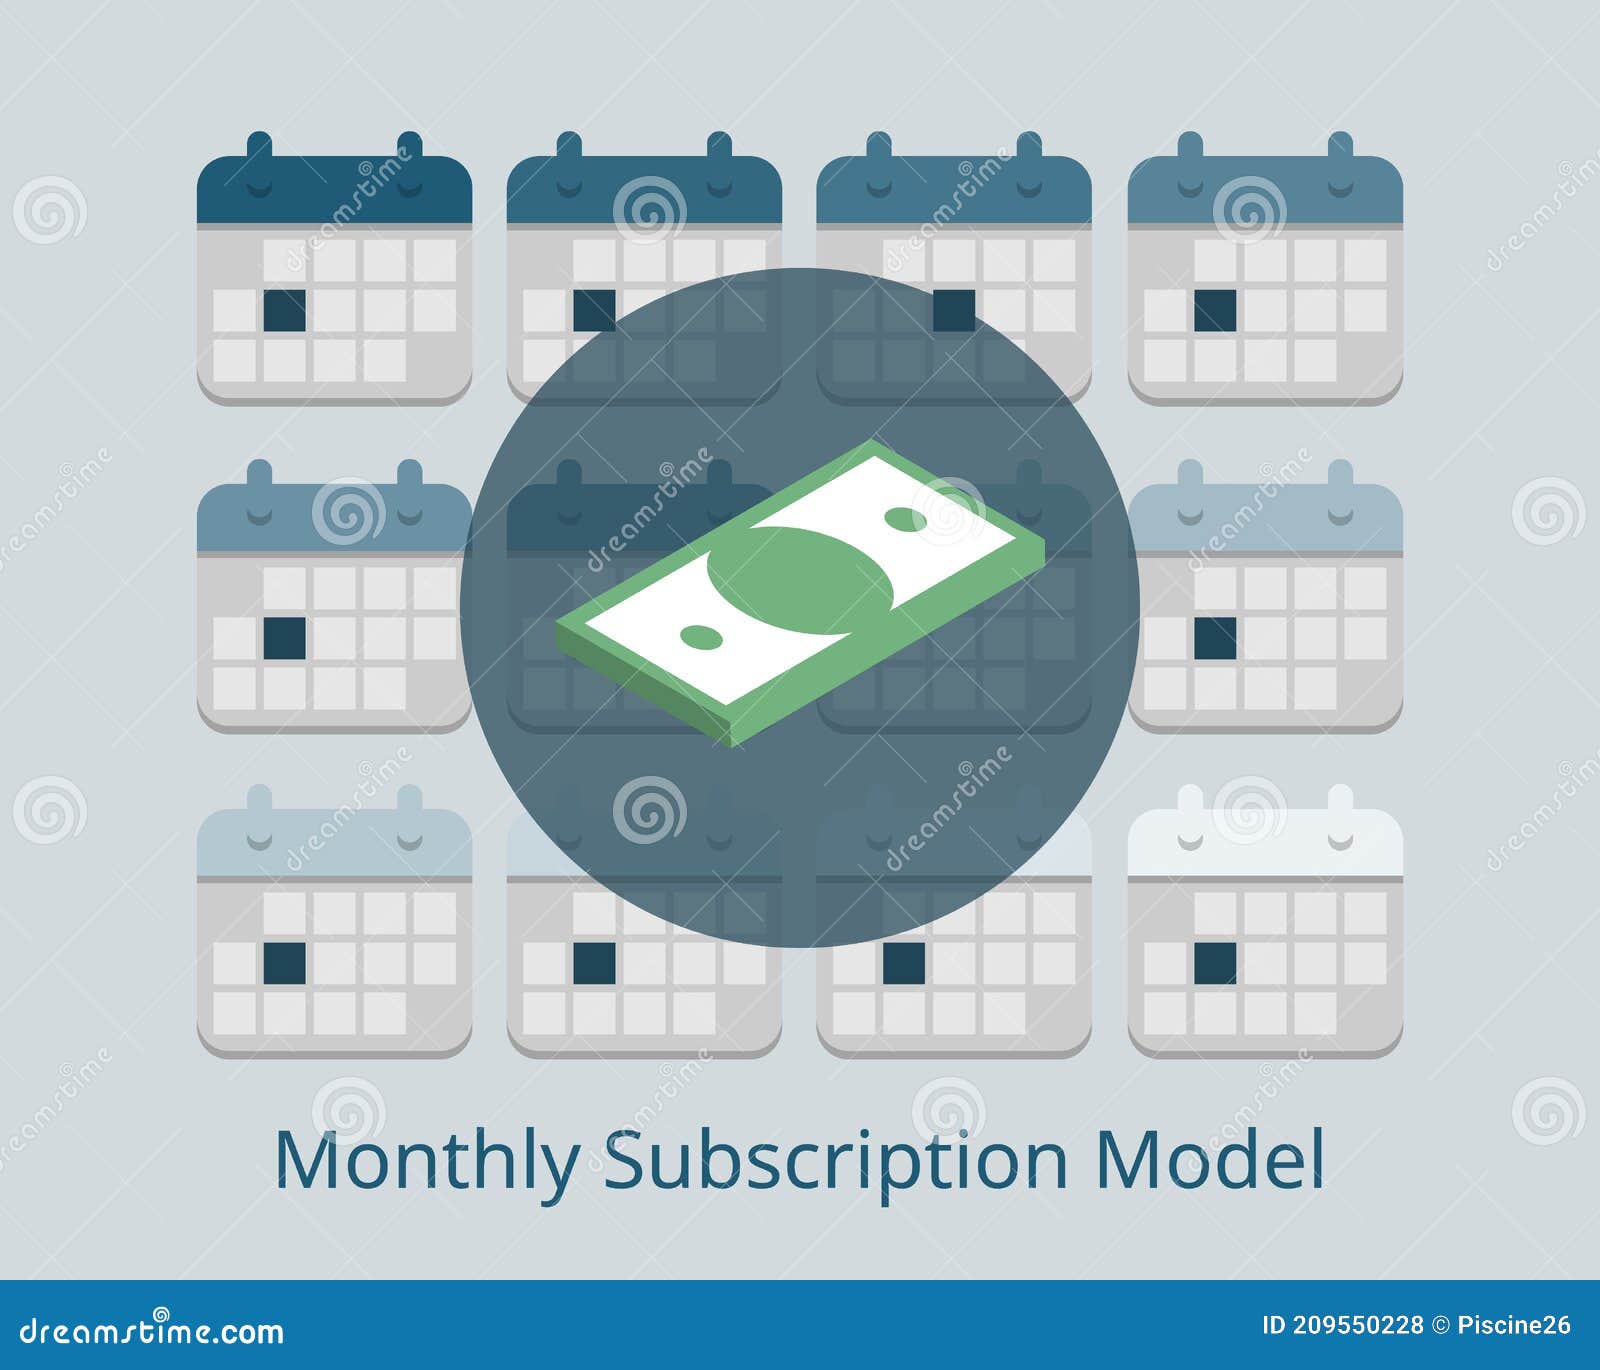 monthly-subscription-model-to-have-recurring-payment-every-month-vector